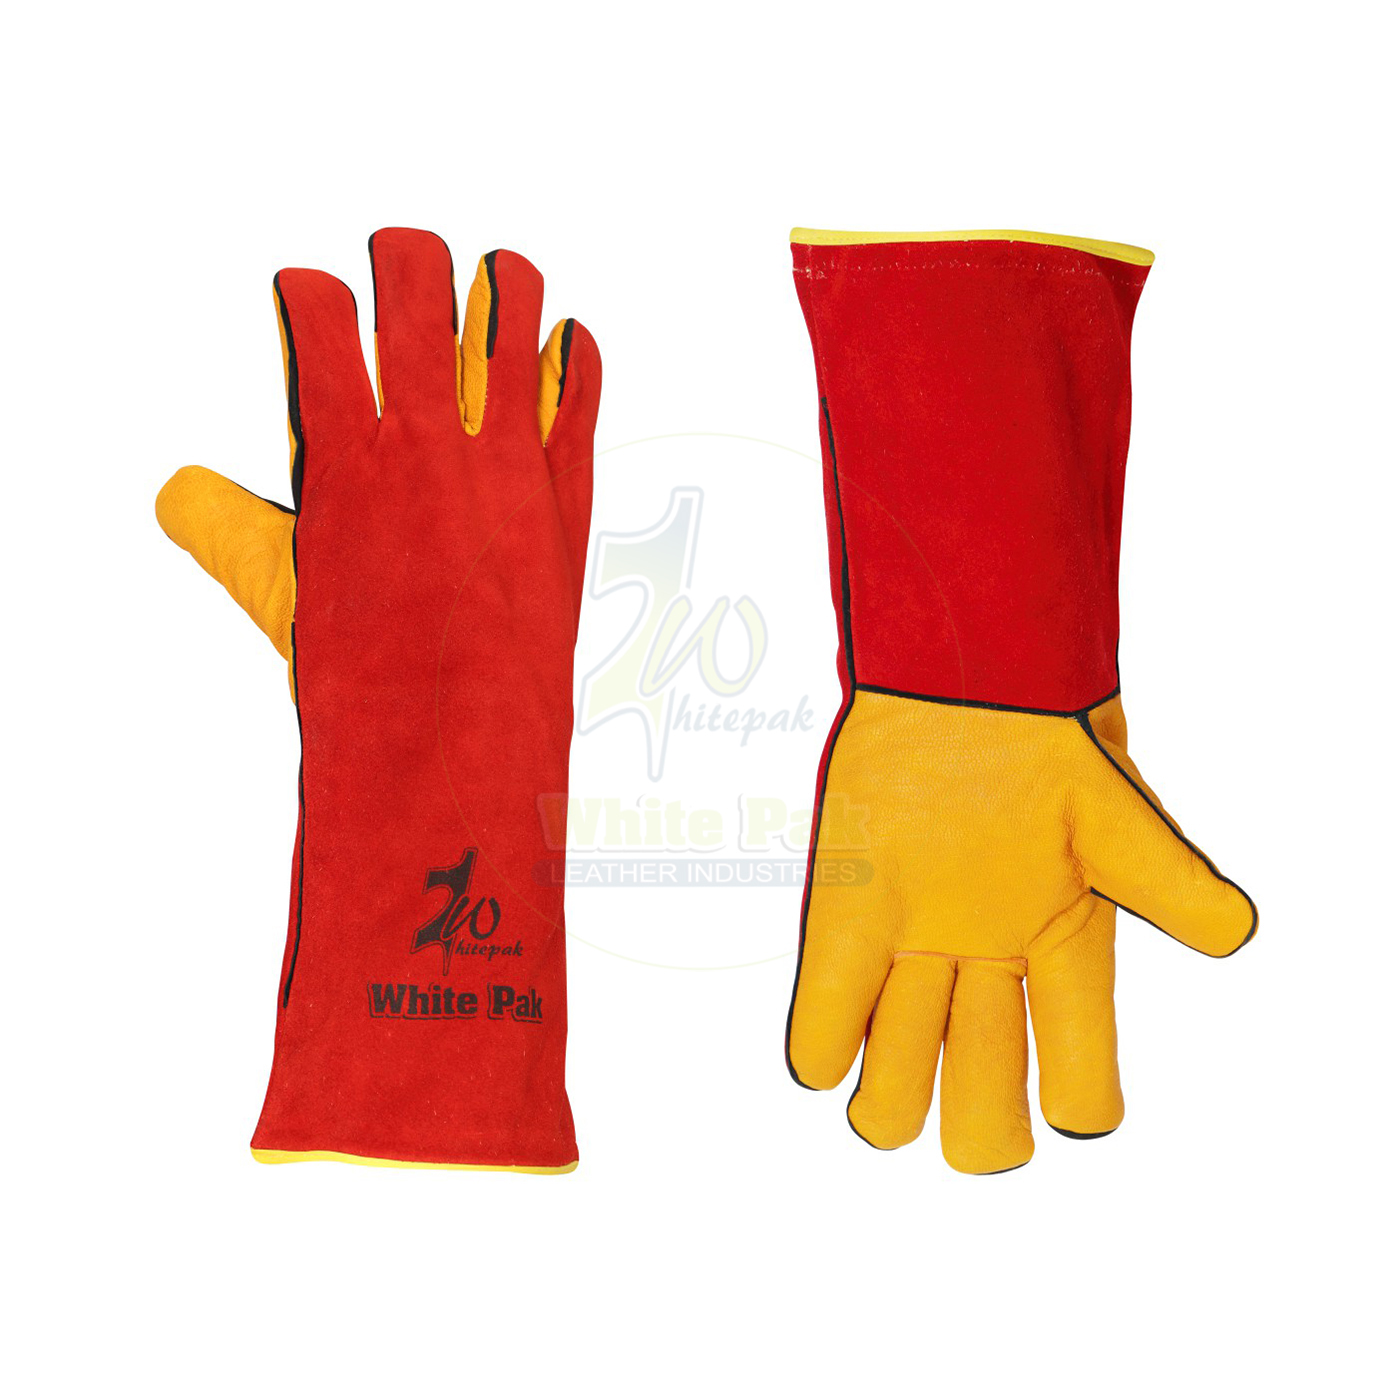 Welding Gloves With Leather Palm